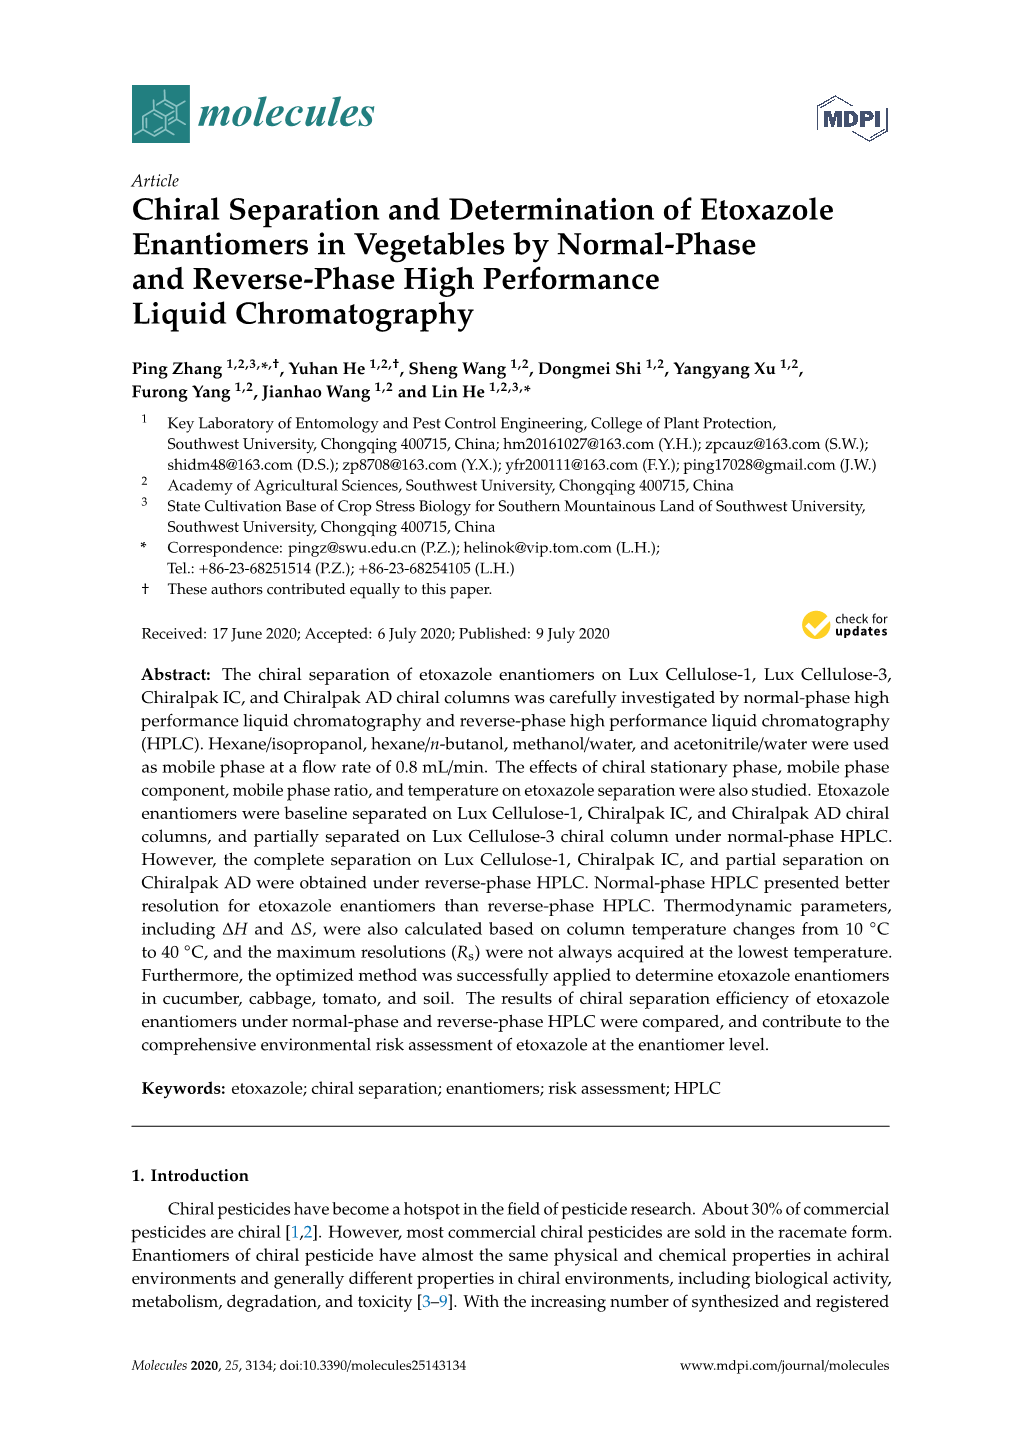 Chiral Separation and Determination of Etoxazole Enantiomers in Vegetables by Normal-Phase and Reverse-Phase High Performance Liquid Chromatography